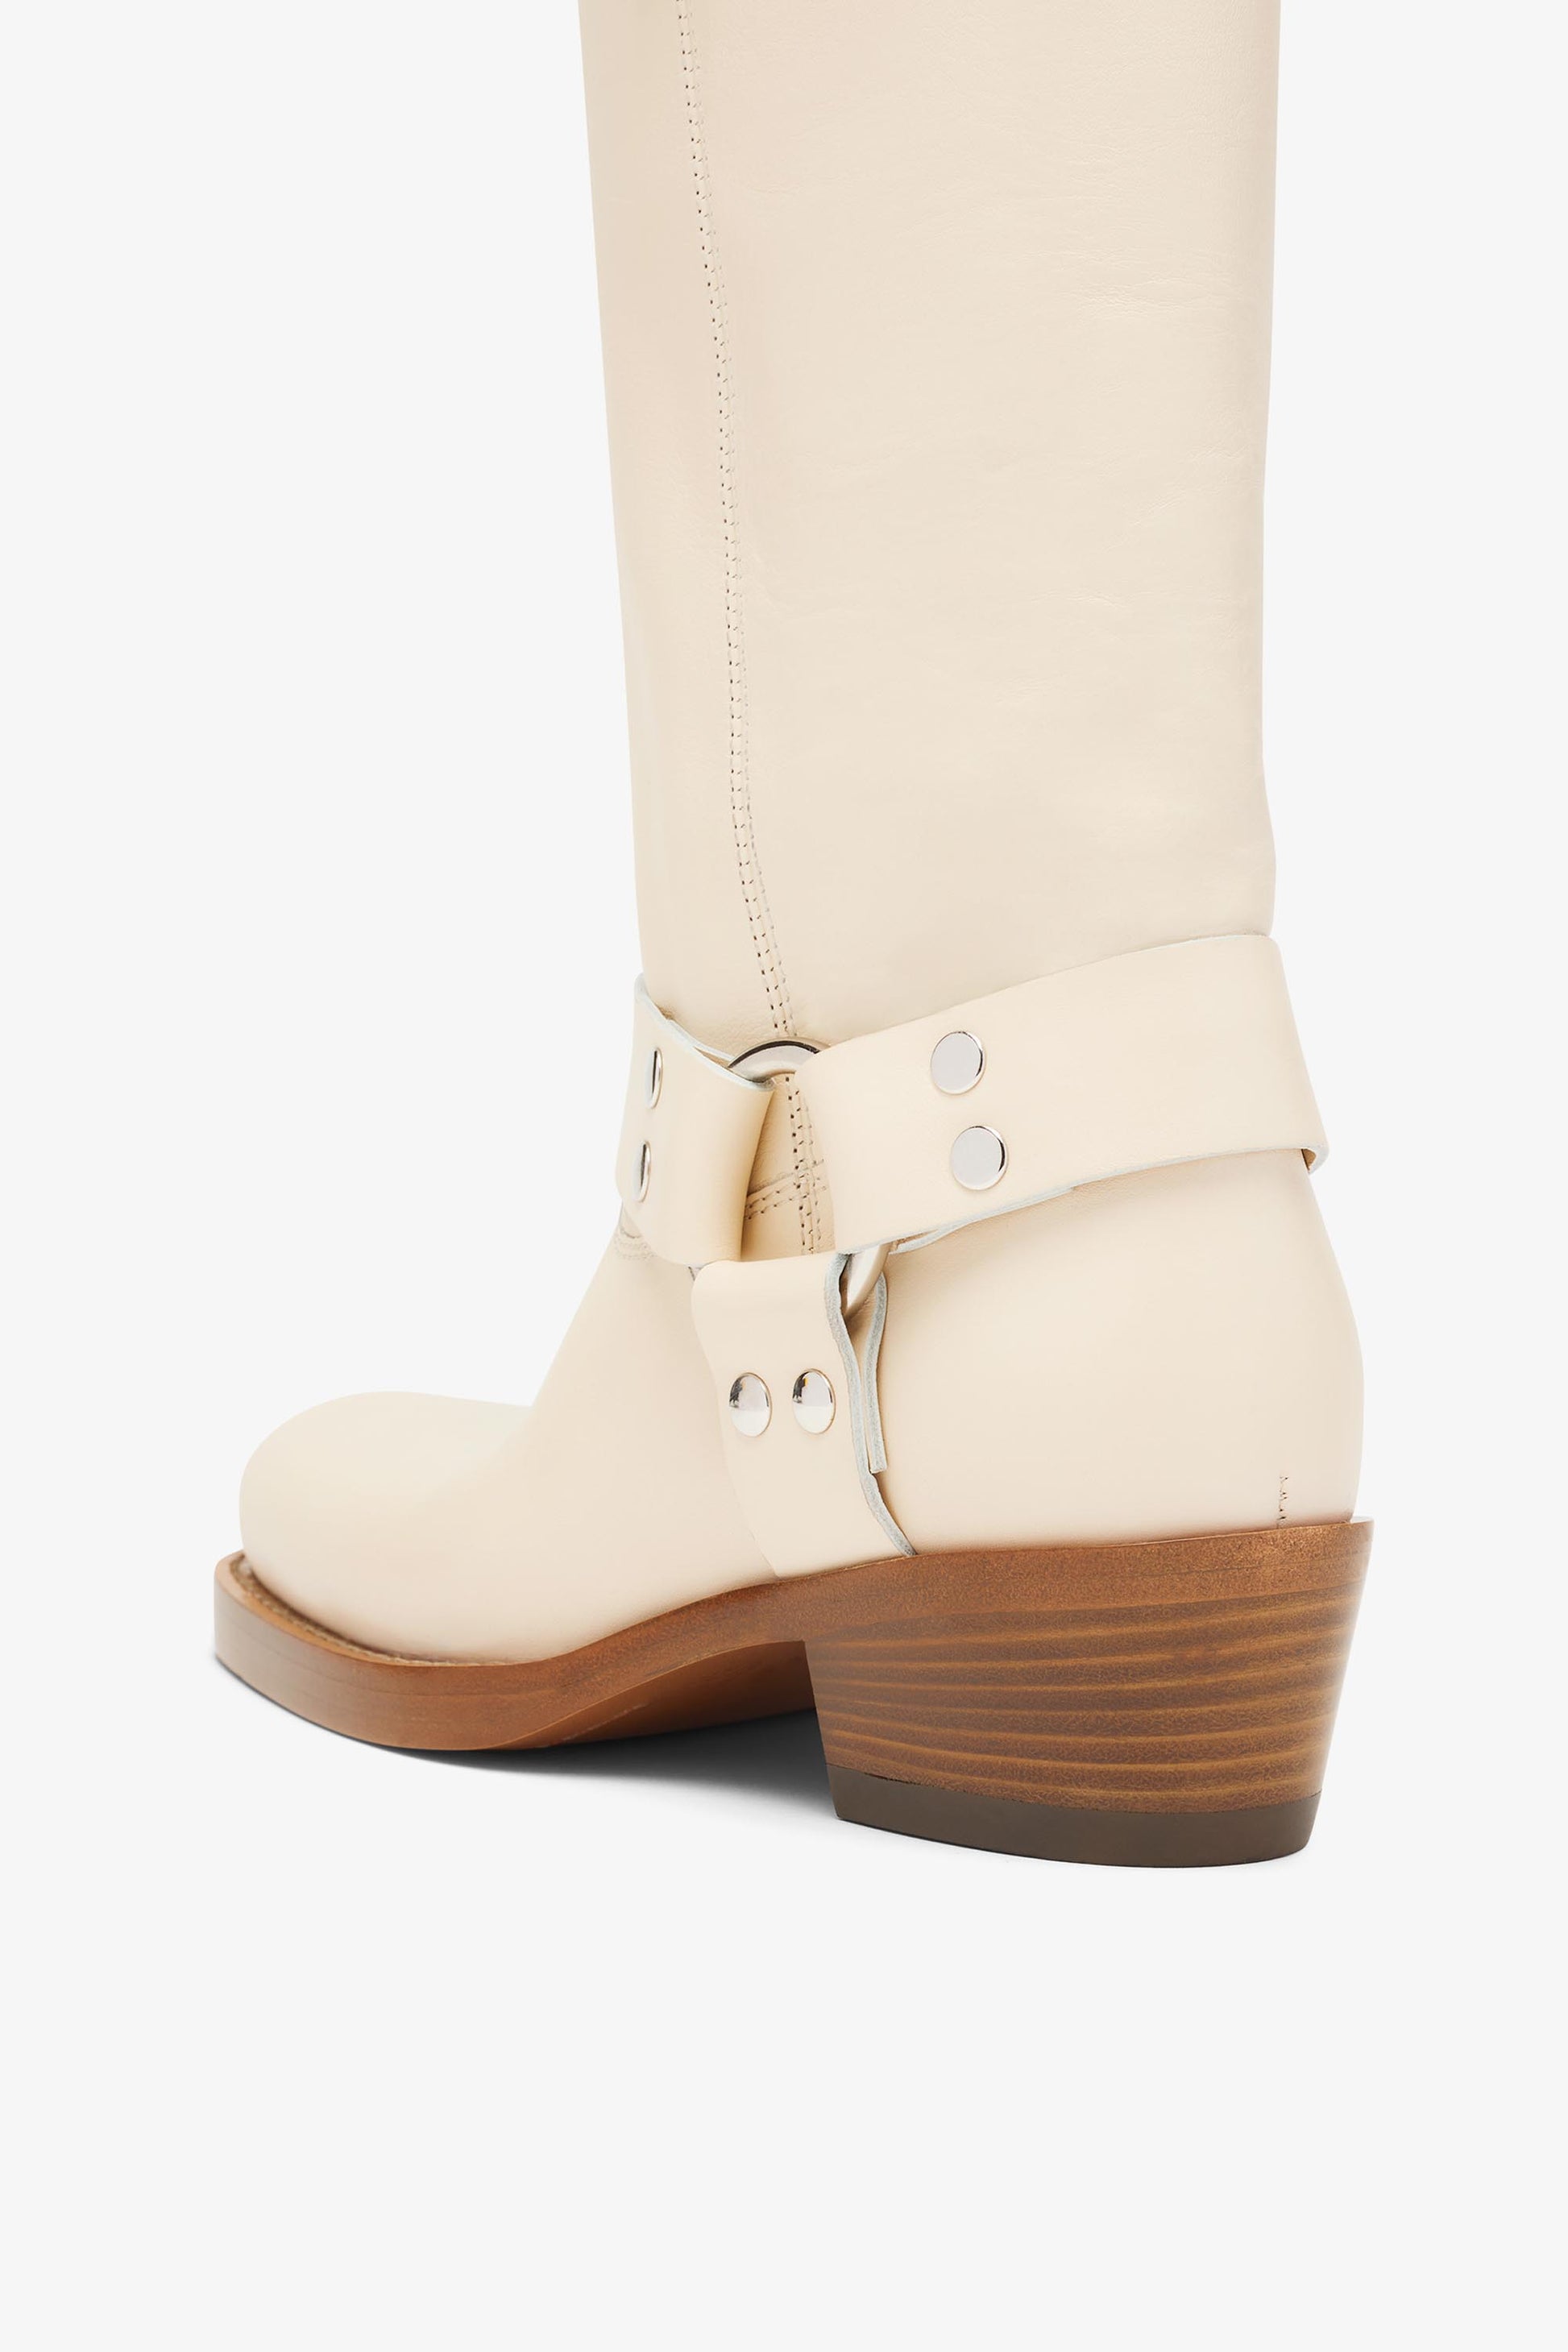 White textured leather boot